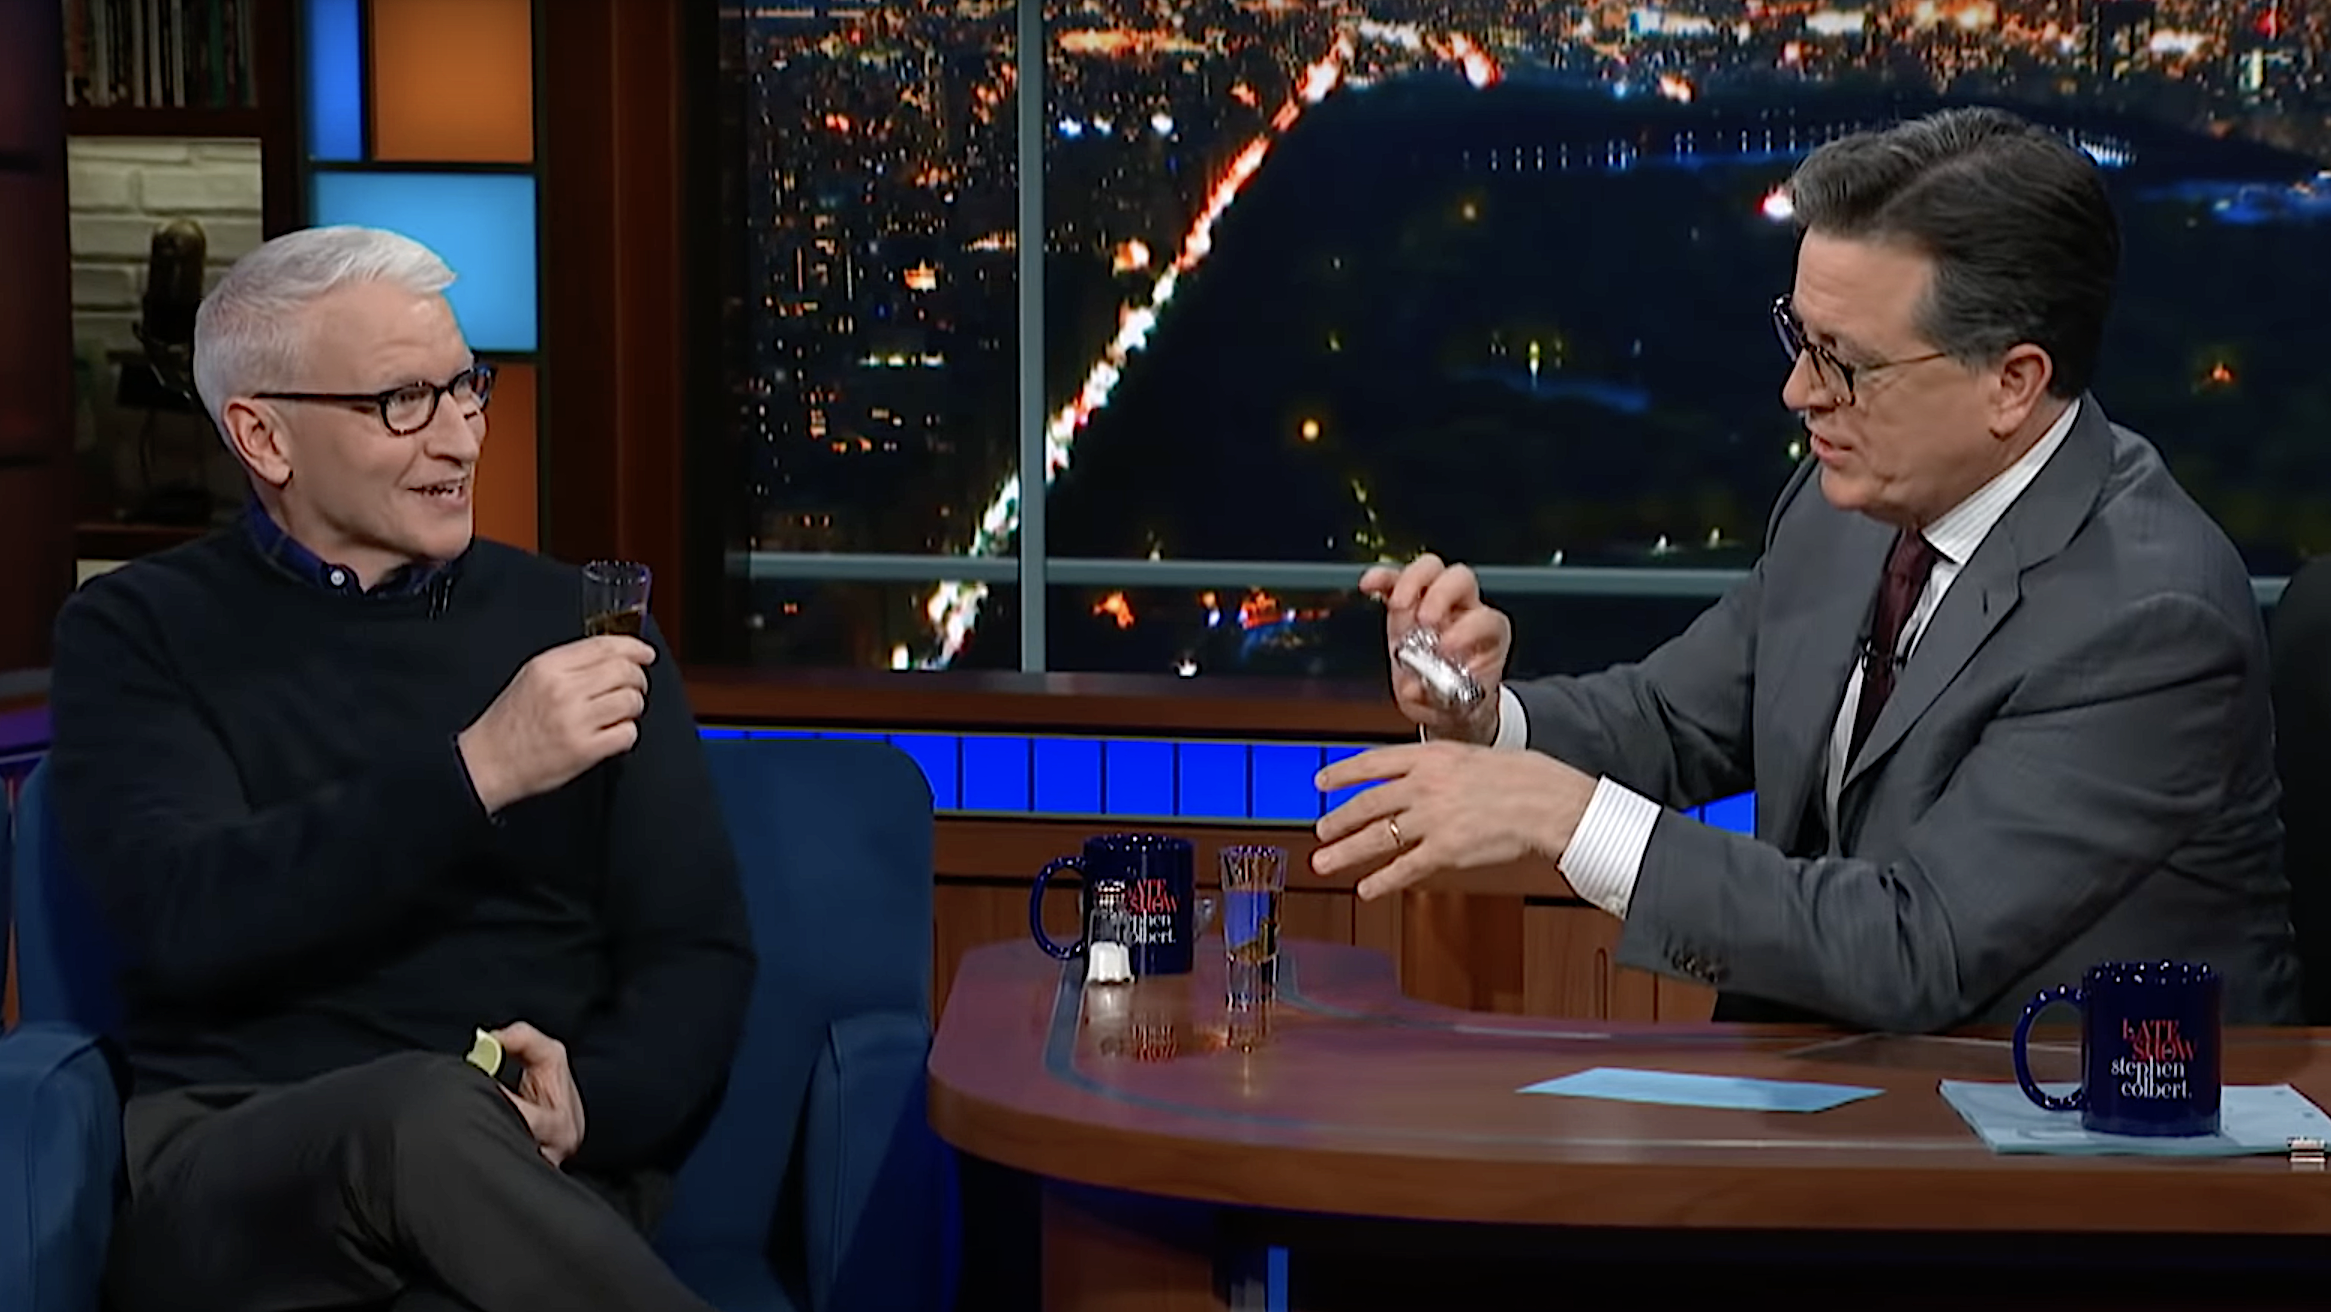 Anderson Cooper does shots with Stephen Colbert while discussing Chris Cuomo’s firing